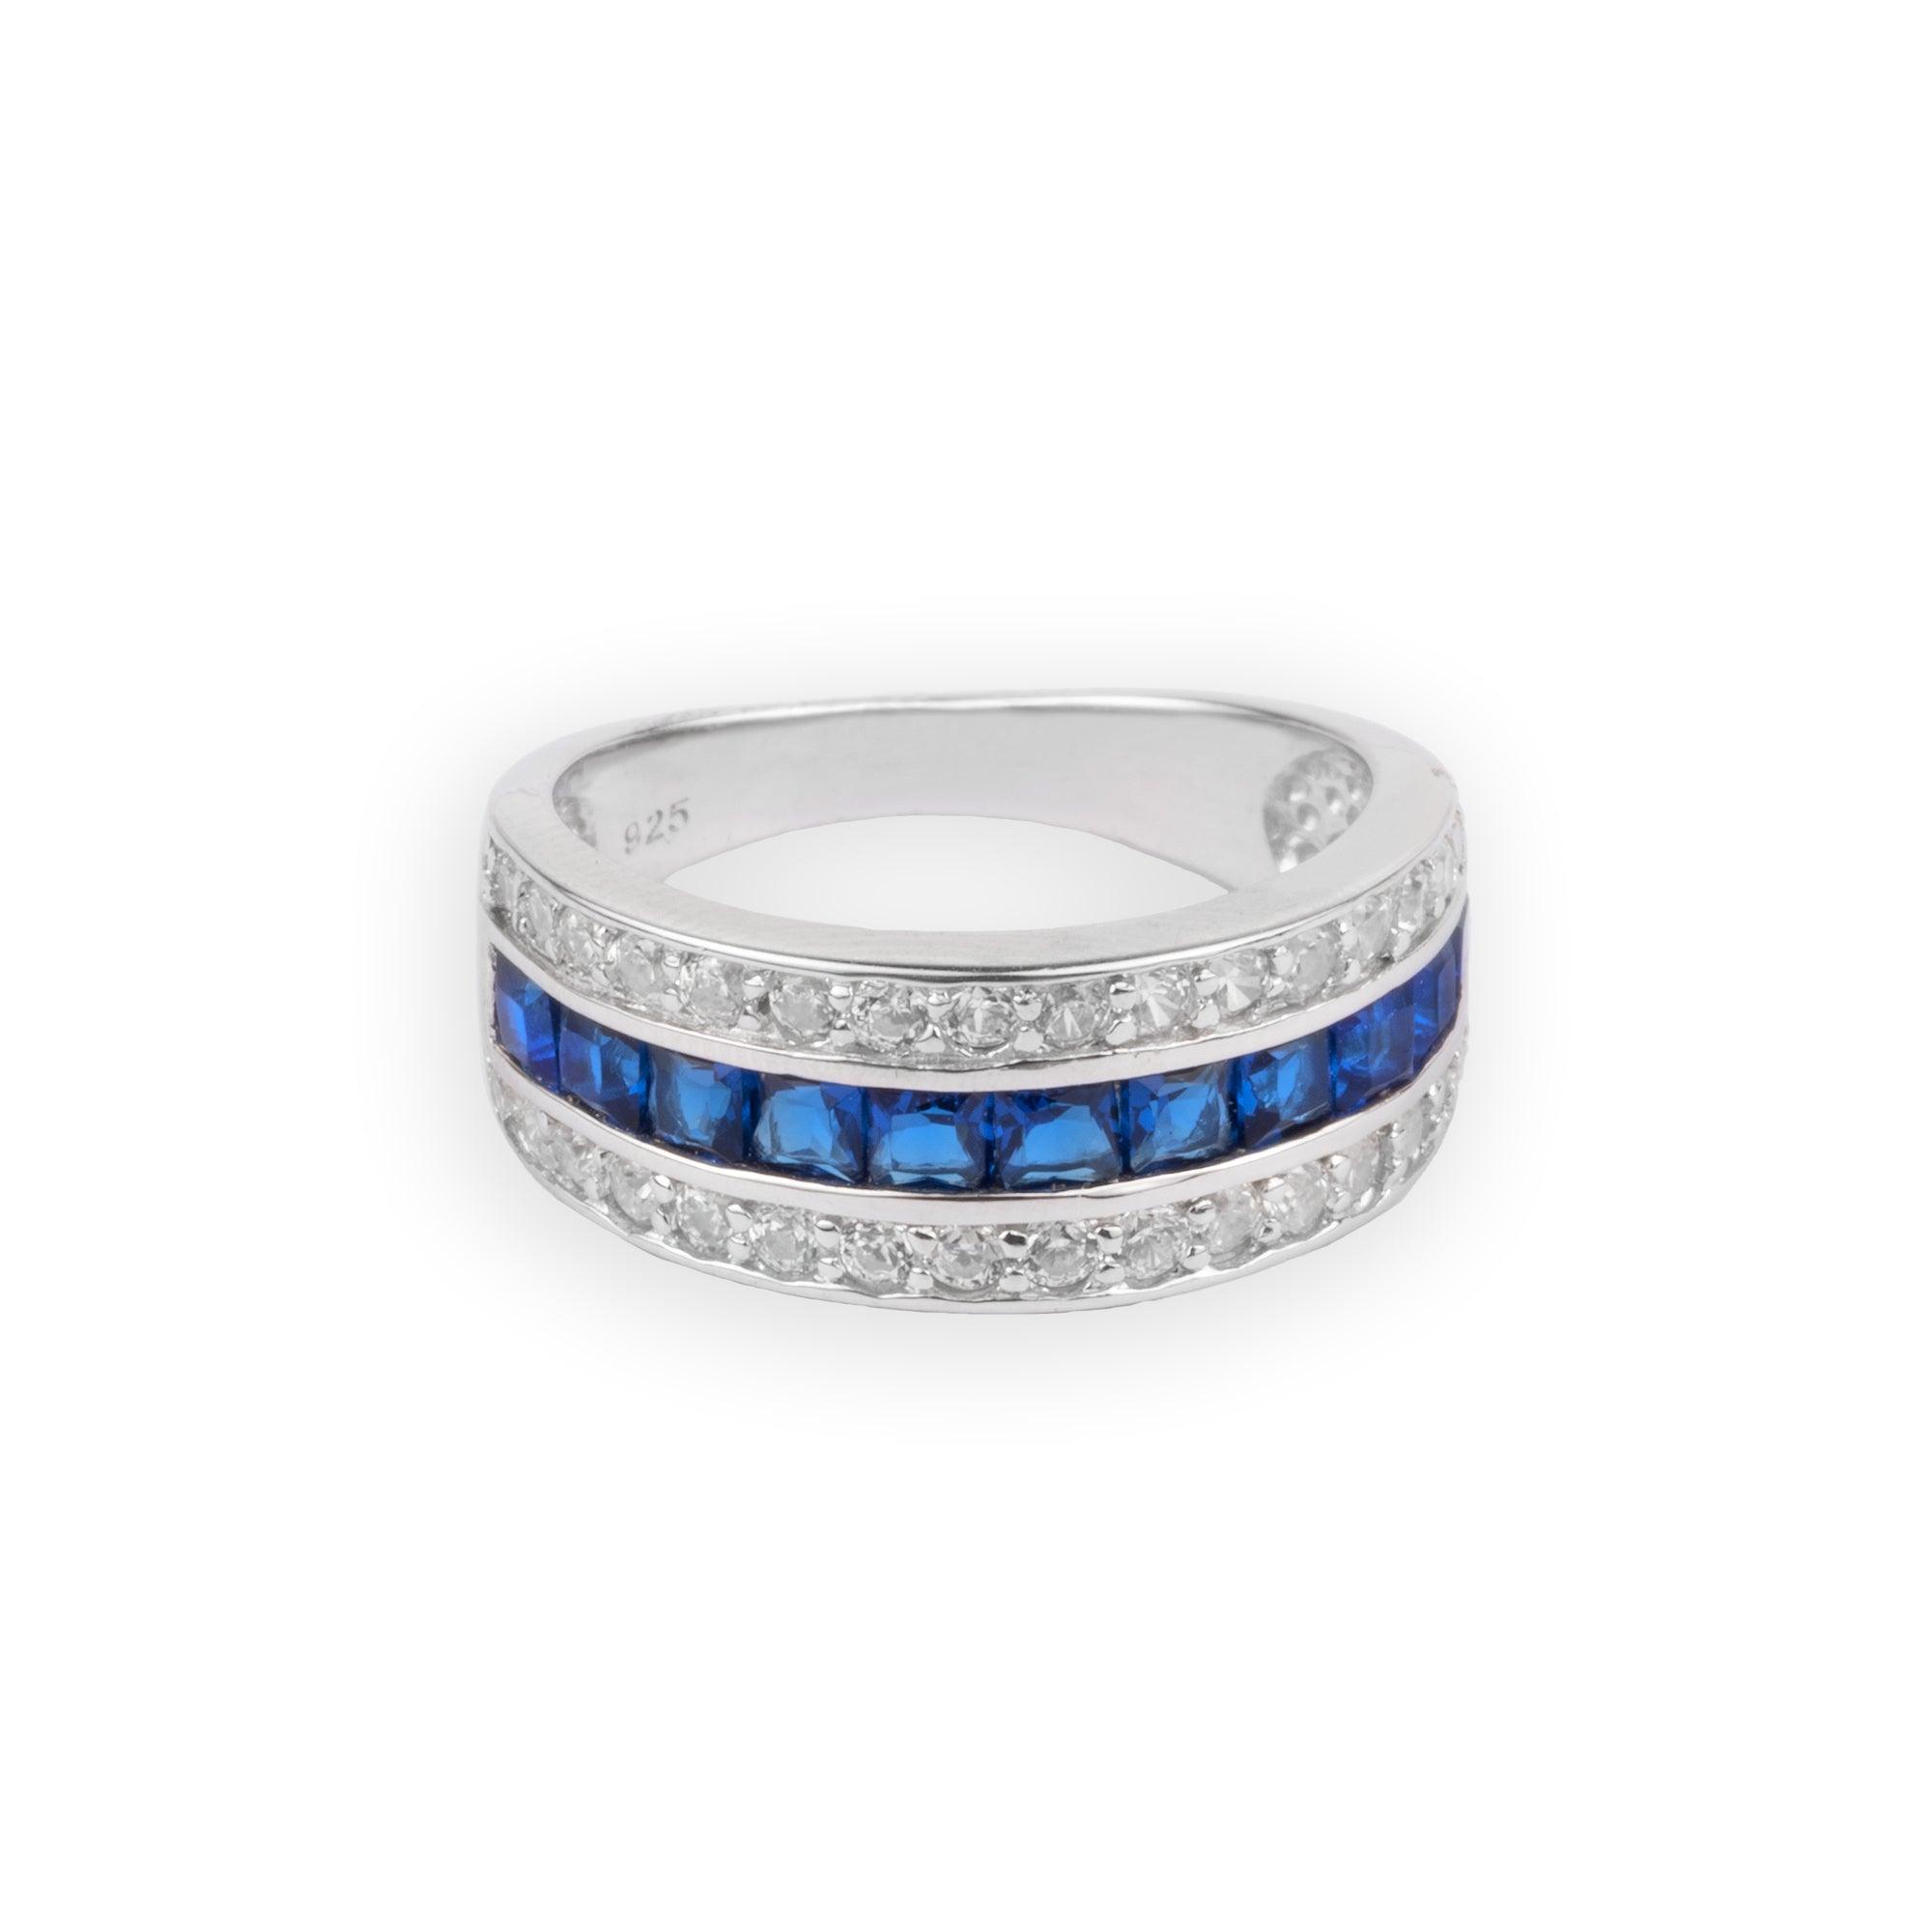 Sterling Silver Cubic Zirconia and Sapphire Ring with Rhodium Plating SR057B - Minar Jewellers